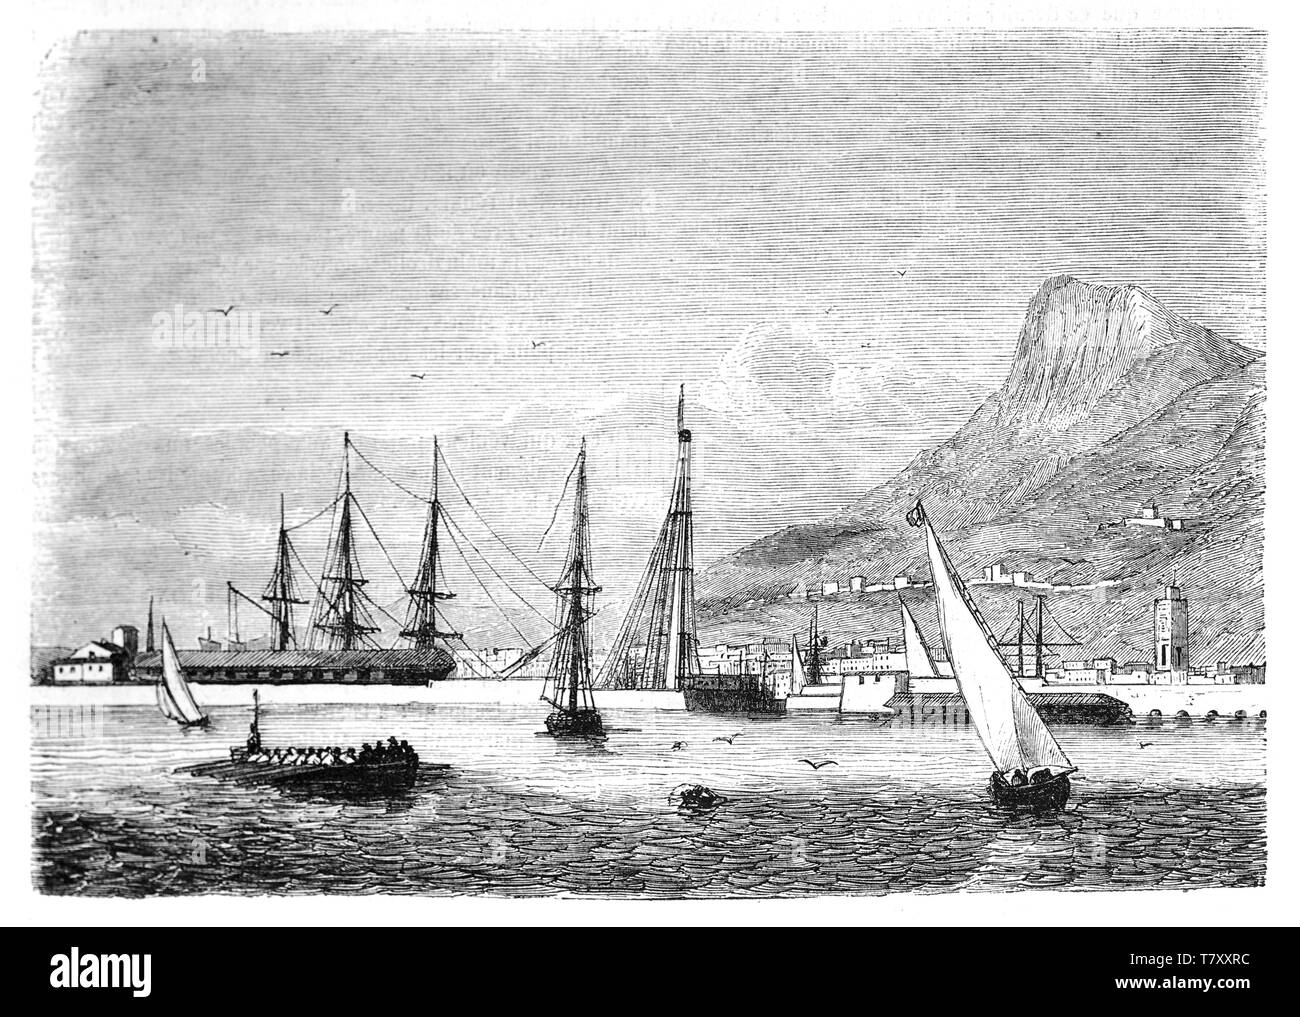 Ancient Toulon seaport viewed from the sea to the shoreline with the mountain on background. Ancient ships sayling and docked. By unidentified author publ. on Magasin Pittoresque Paris-1848 Stock Photo